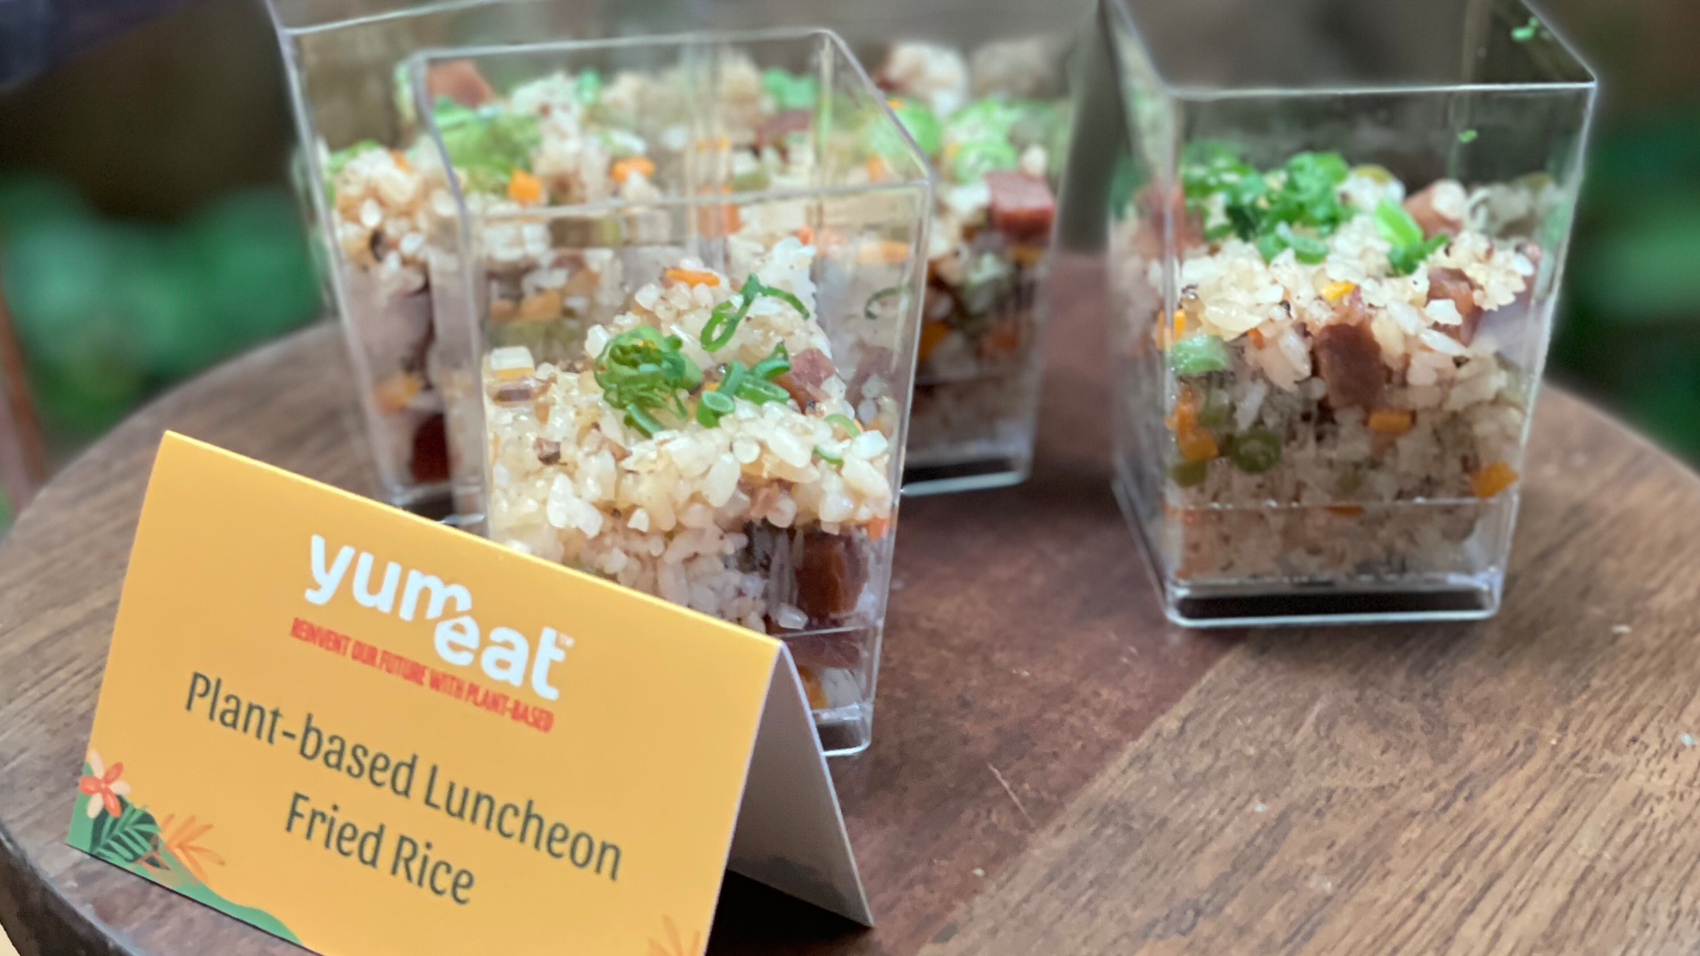 Plant-Based Luncheon Fried Rice